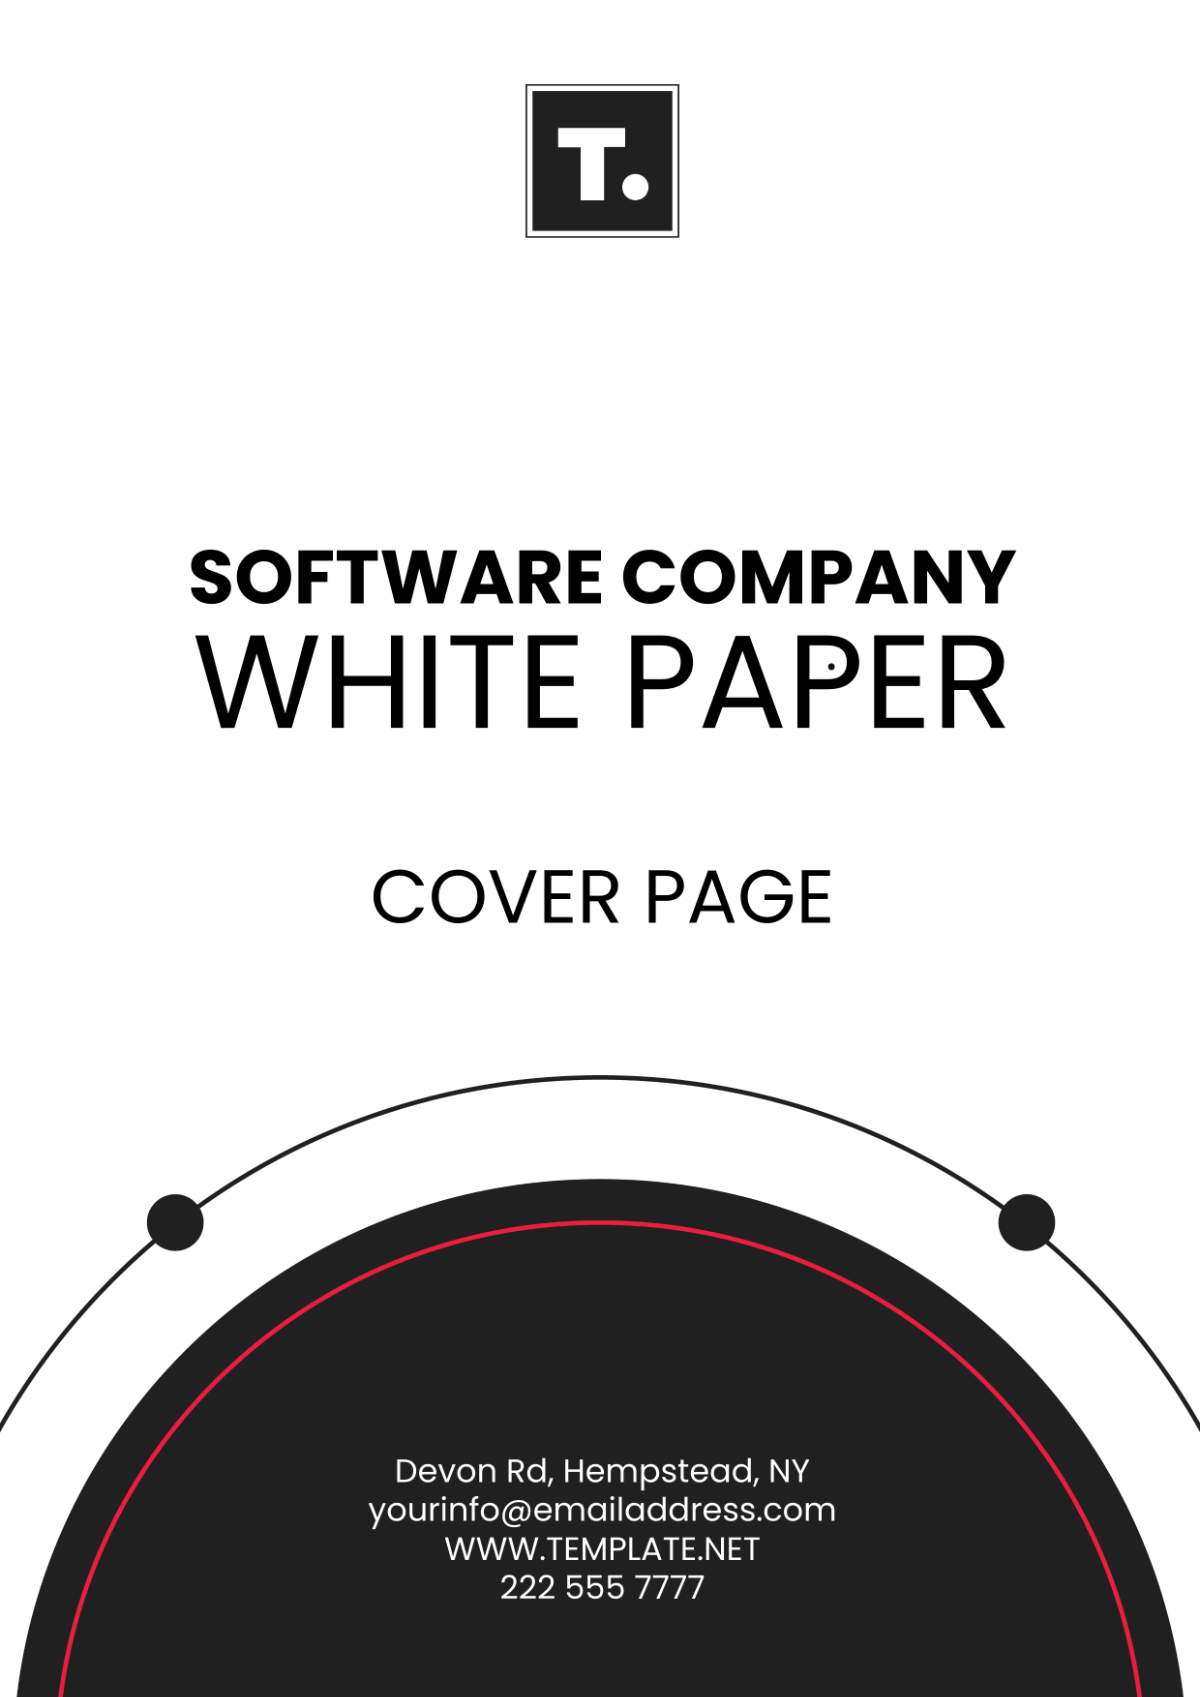 Software Company White Paper Cover Page